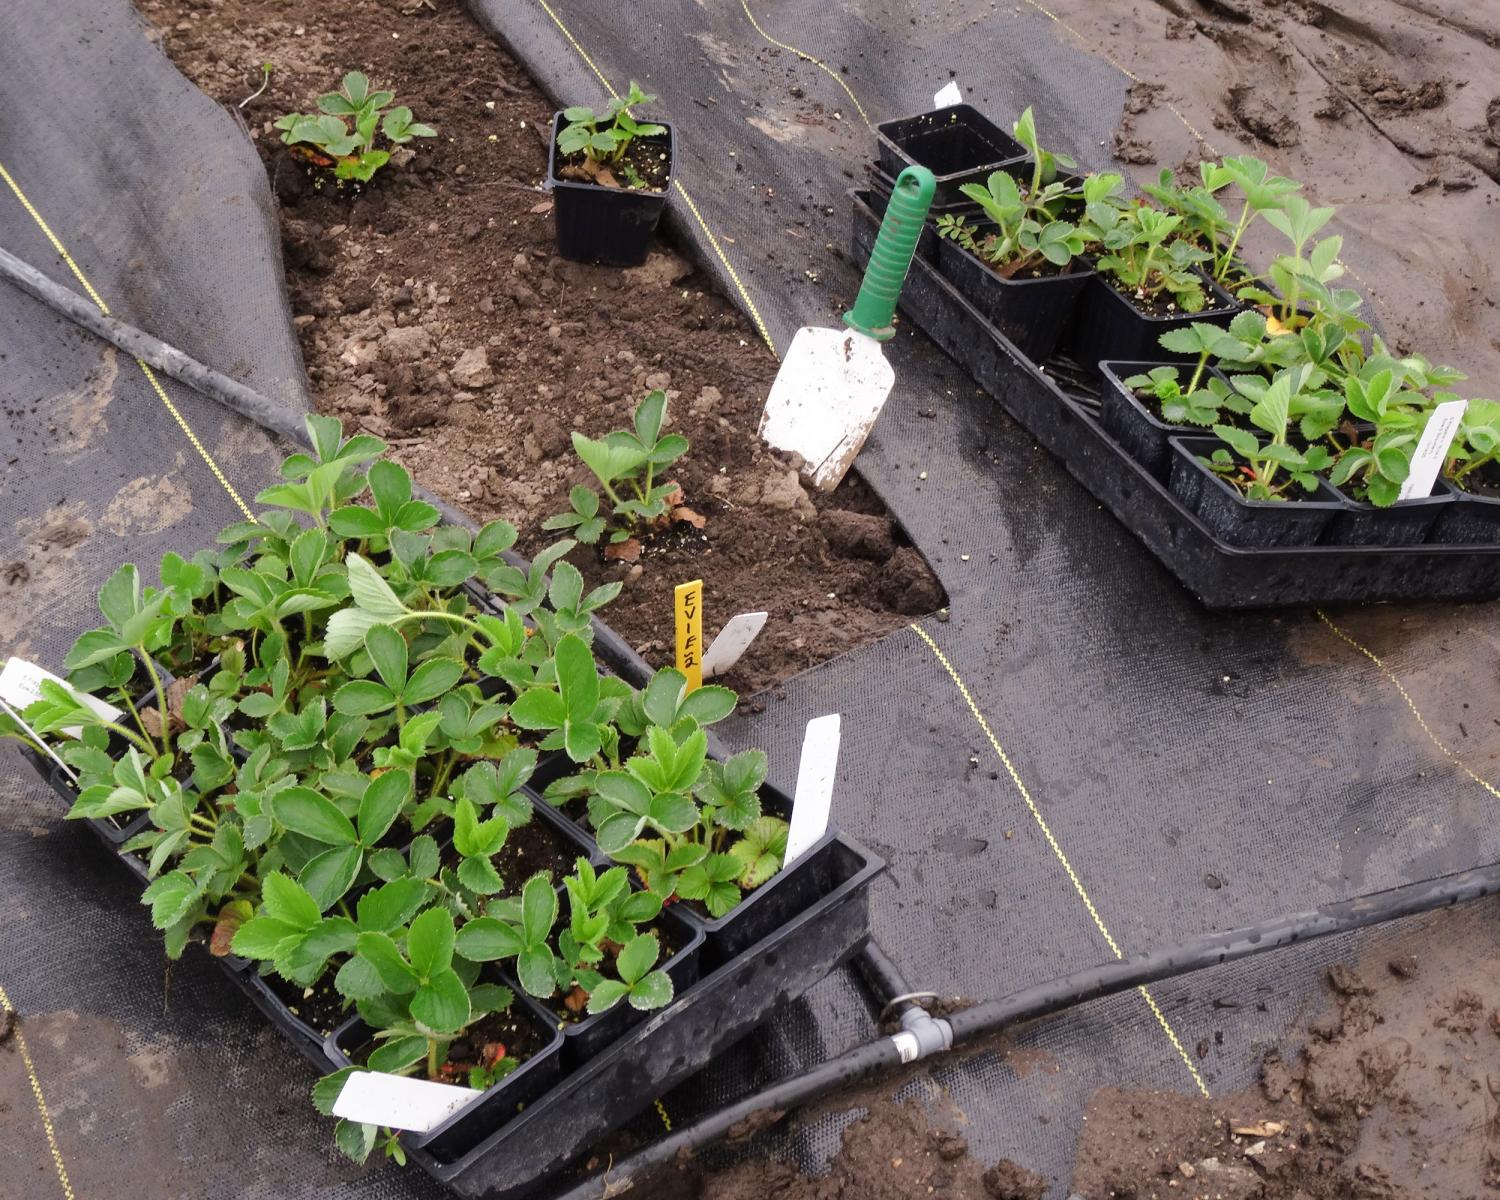 Figure 1. The strawberry plantlets that were propagated from the stolons last fall.